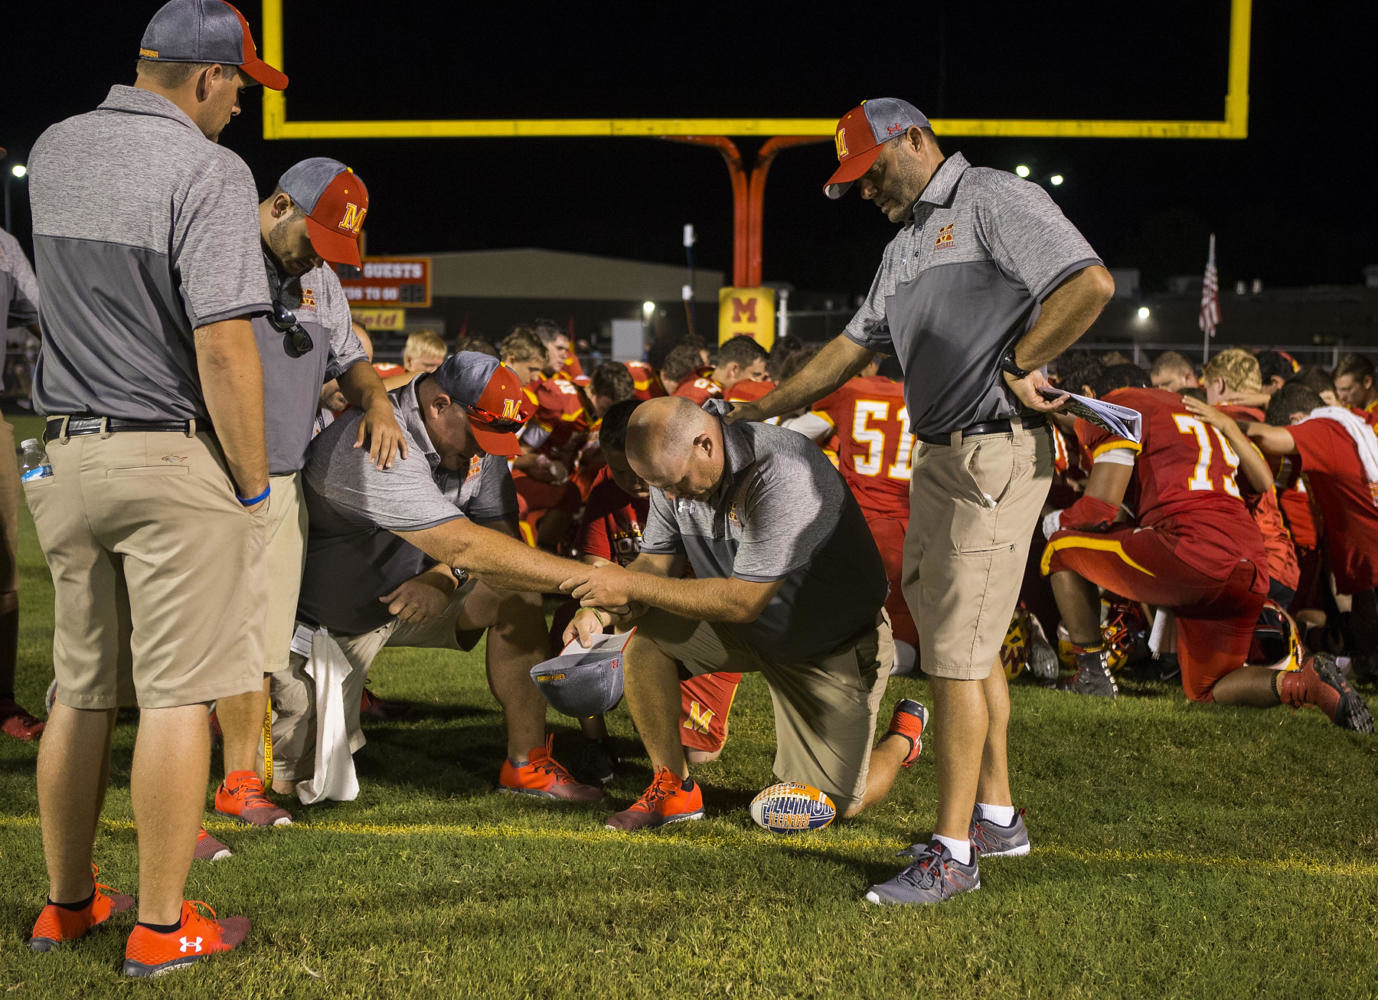 The Red Devils coaching staff prays together after losing to the Carbondale Terriers in the the 100th meeting of the two teams on Friday, Aug. 25, 2017, at Doc Bencini Field, in Murphysboro, Illinois. (Ryan Michalesko | @photosbylesko)